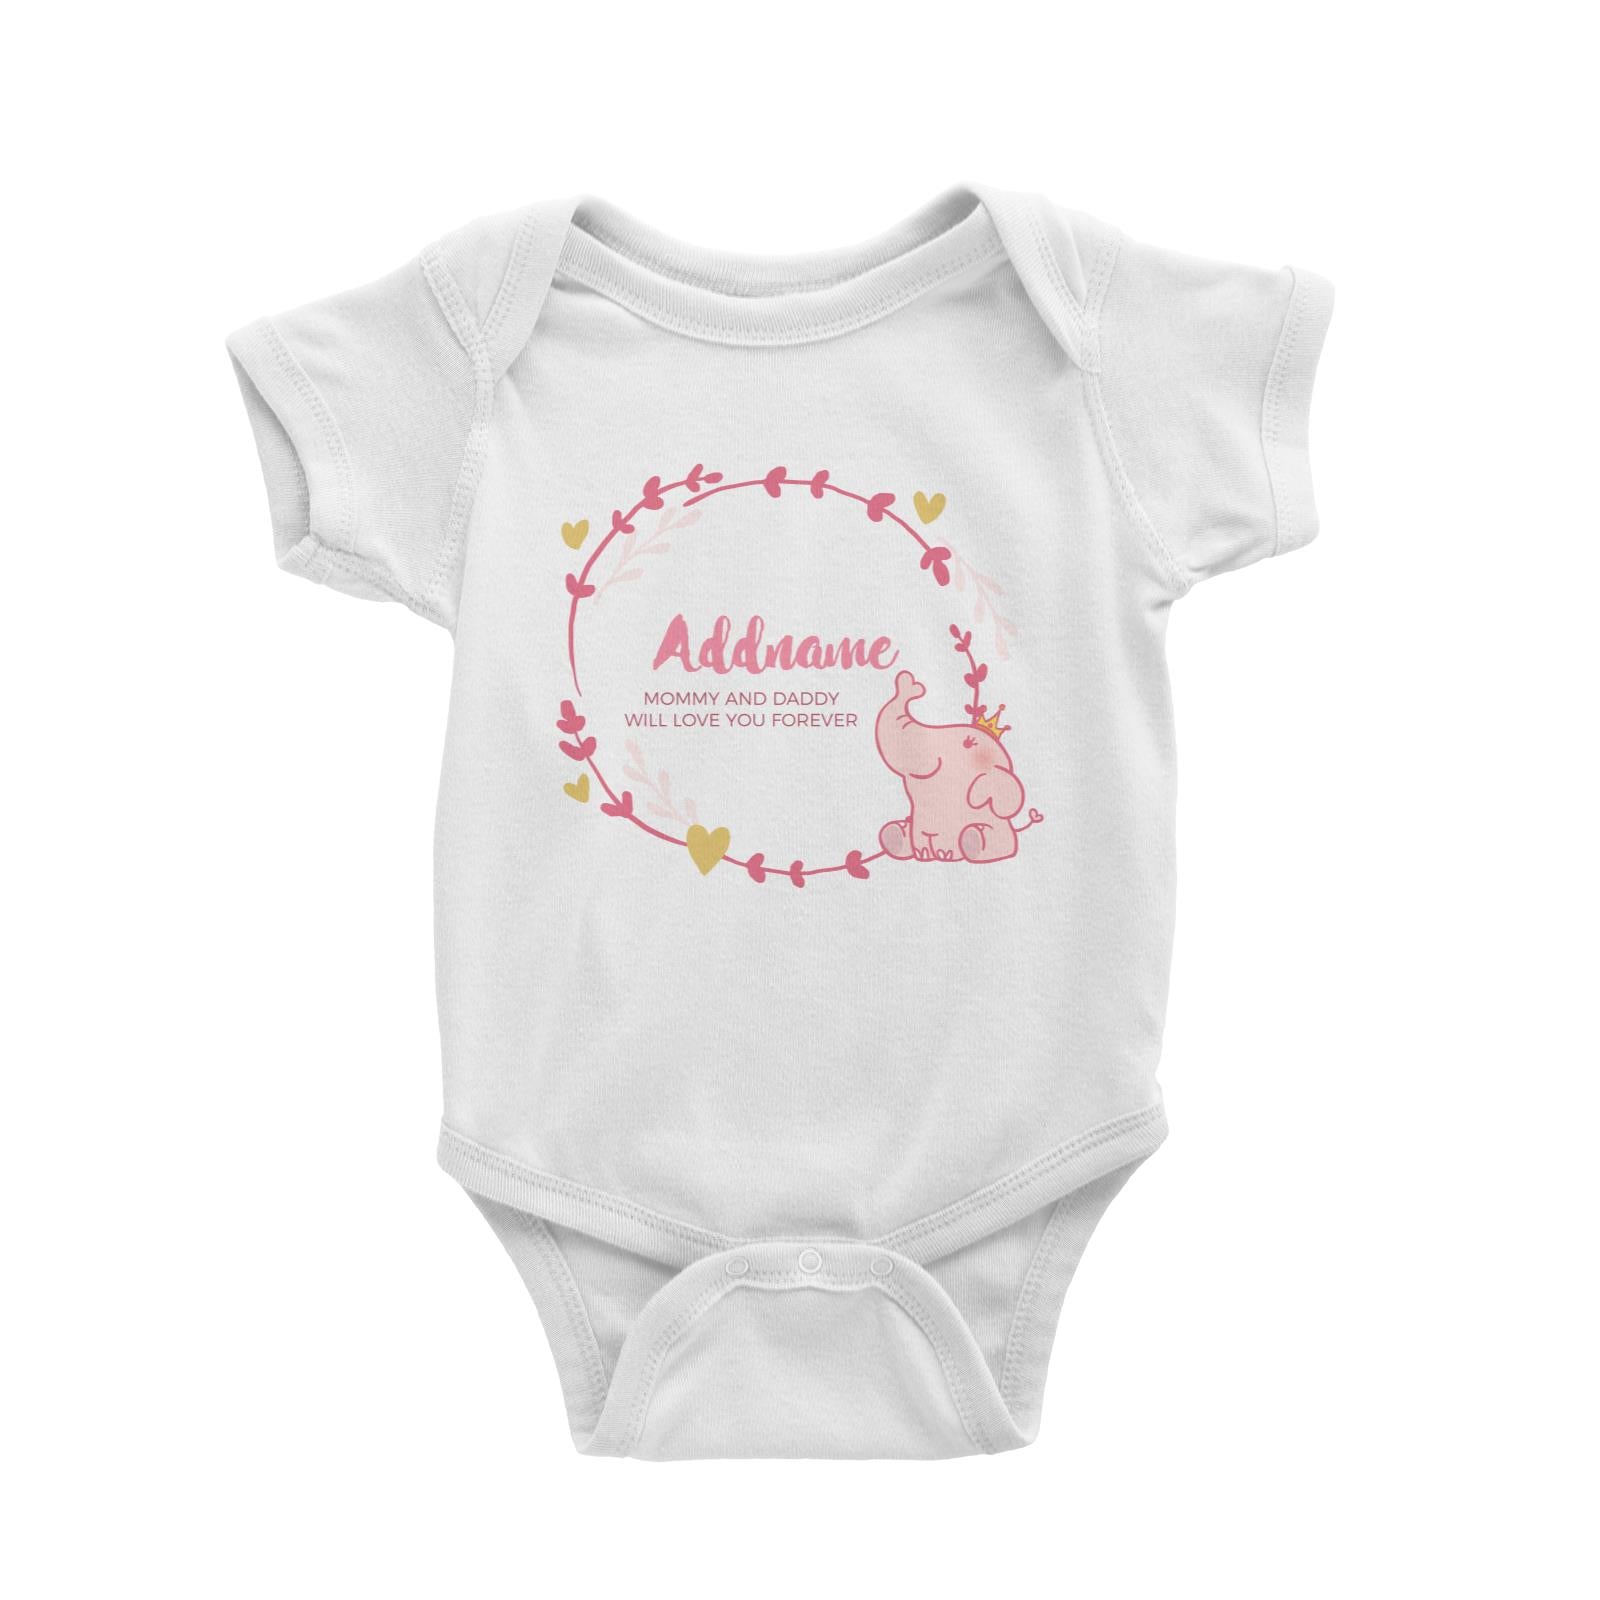 Cute Pink Elephant Princess Personalizable with Name and Text Baby Romper